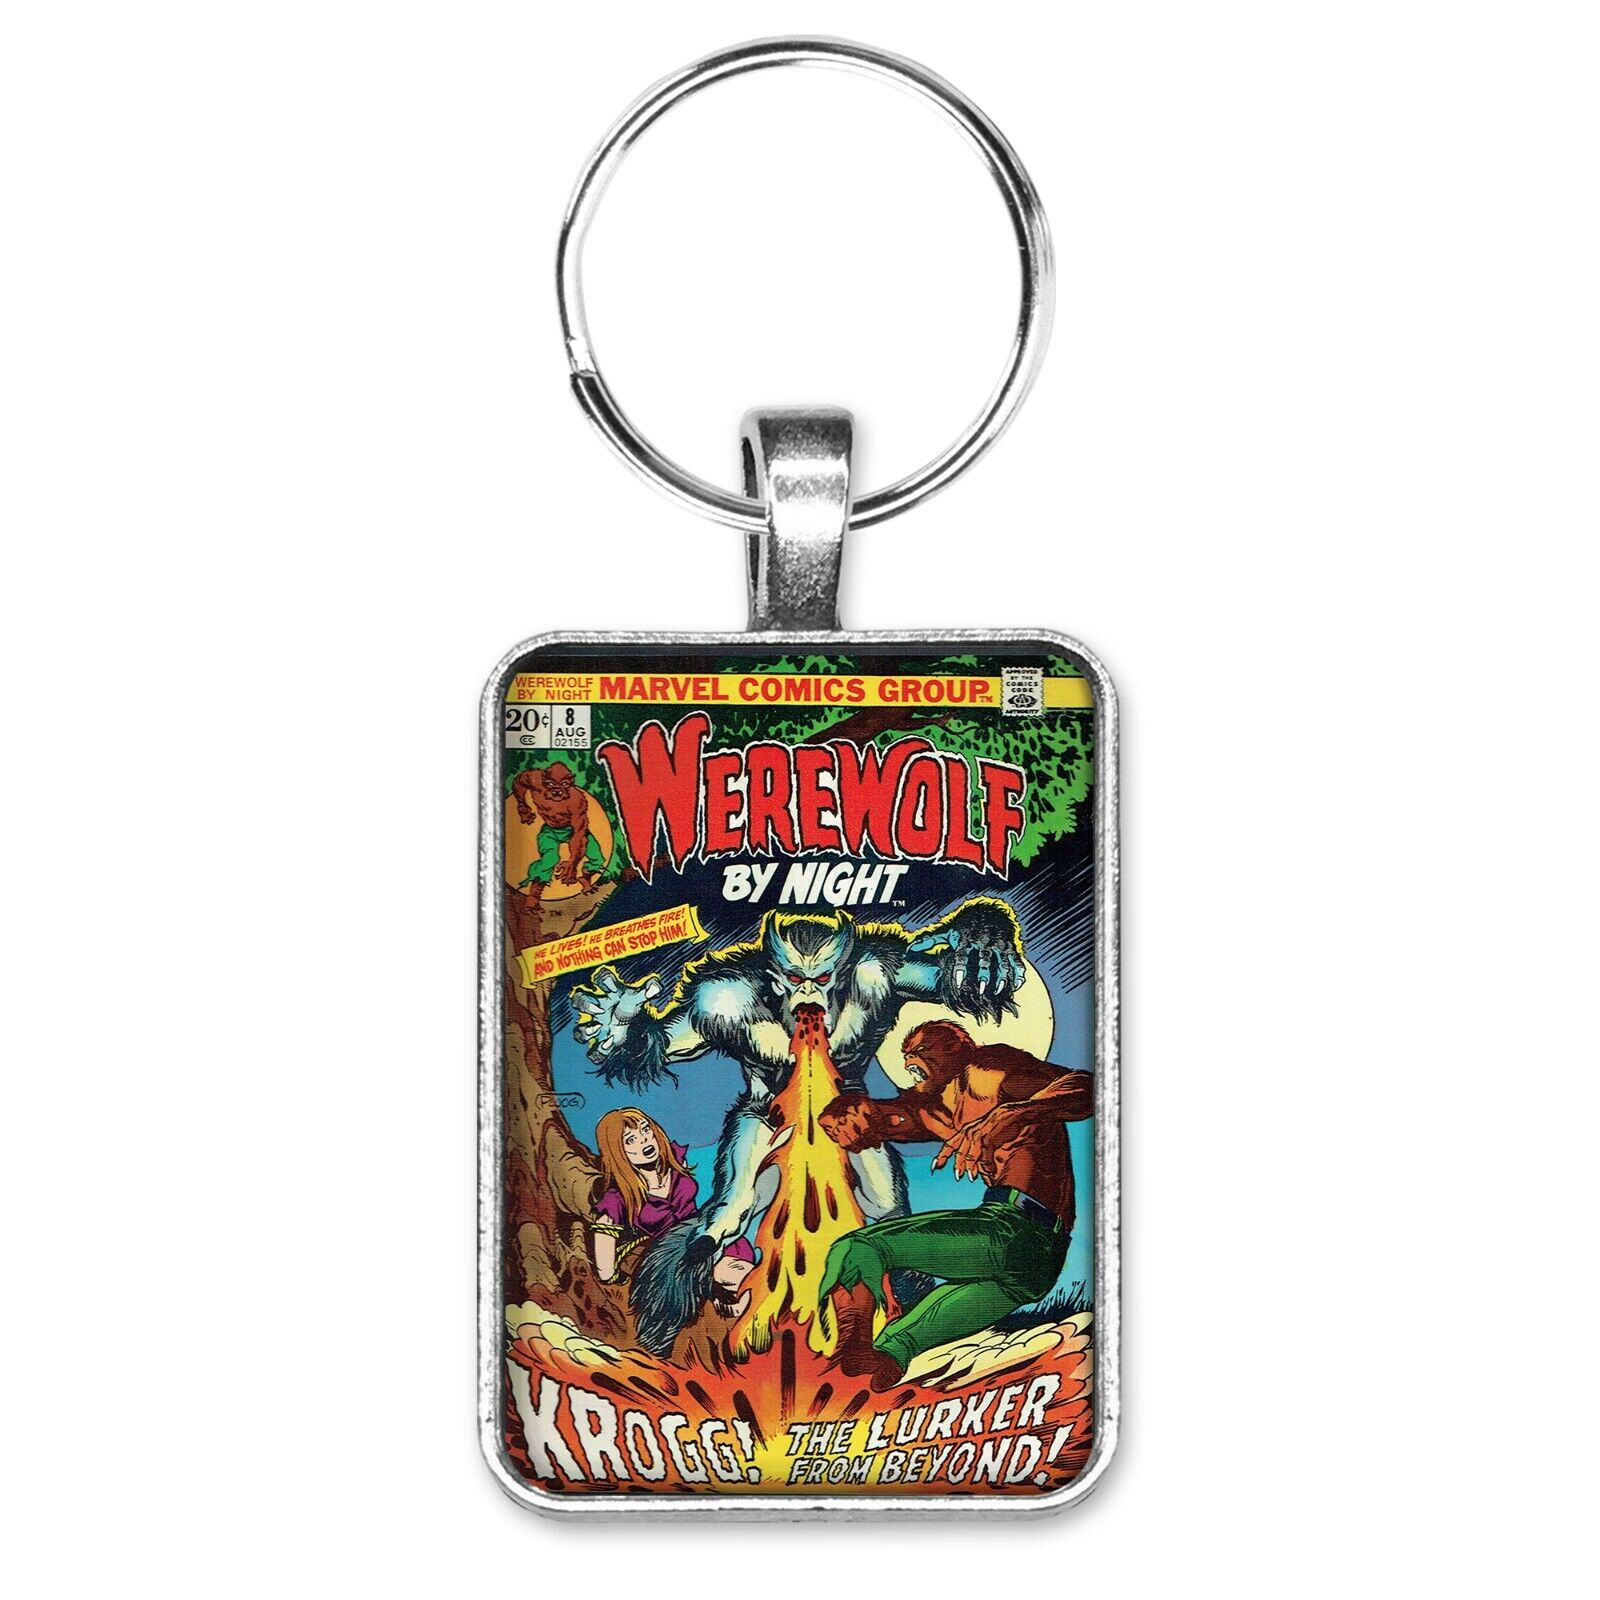 Werewolf By Night #8 Cover Key Ring or Necklace Classic Horror Hero Comic Book